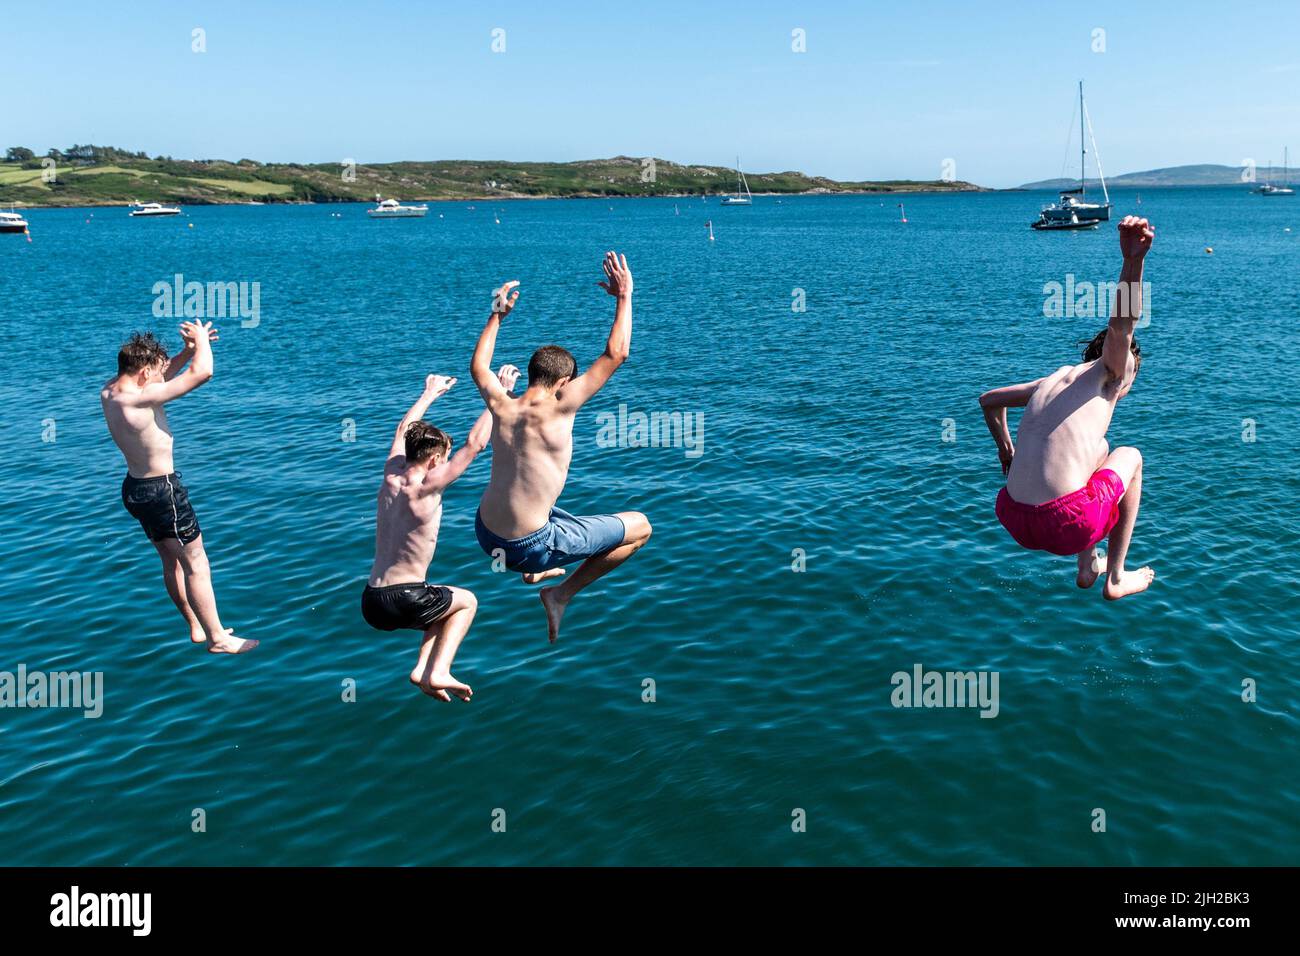 Schull, West Cork, Ireland. 14th July, 2022. The temperatures in West Cork hit 23C today, with many people heading for the coast to cool off. Jumping off Schull pier to cool down were Robert Collins, Skibbereen; Conor Lawson, Schull; Jackson Little, Ballydehob and Dylan Crowley, Mealagh Valley. Credit: AG News/Alamy Live News Stock Photo